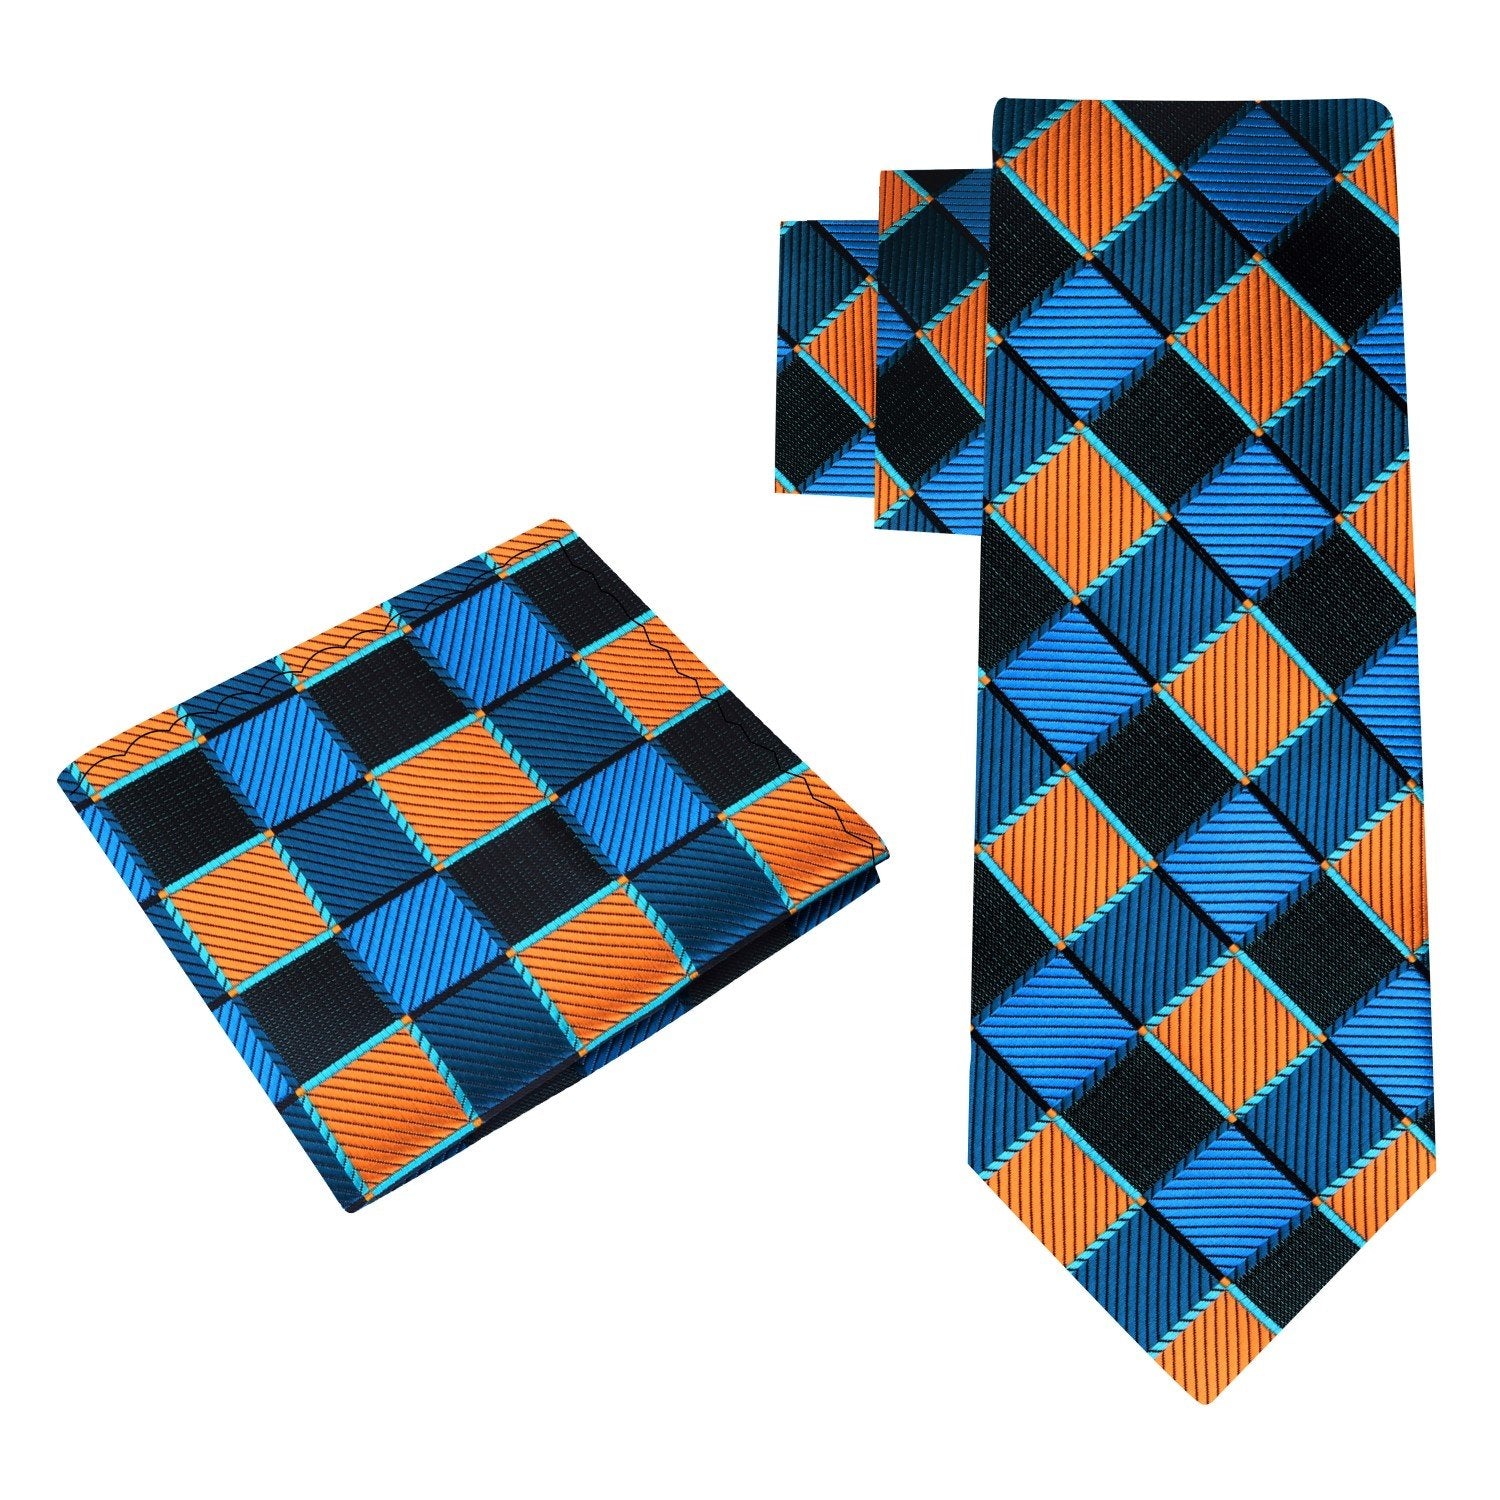 Alt View: A Teal And Orange Geometric Check Pattern Necktie With Matching Pocket Square